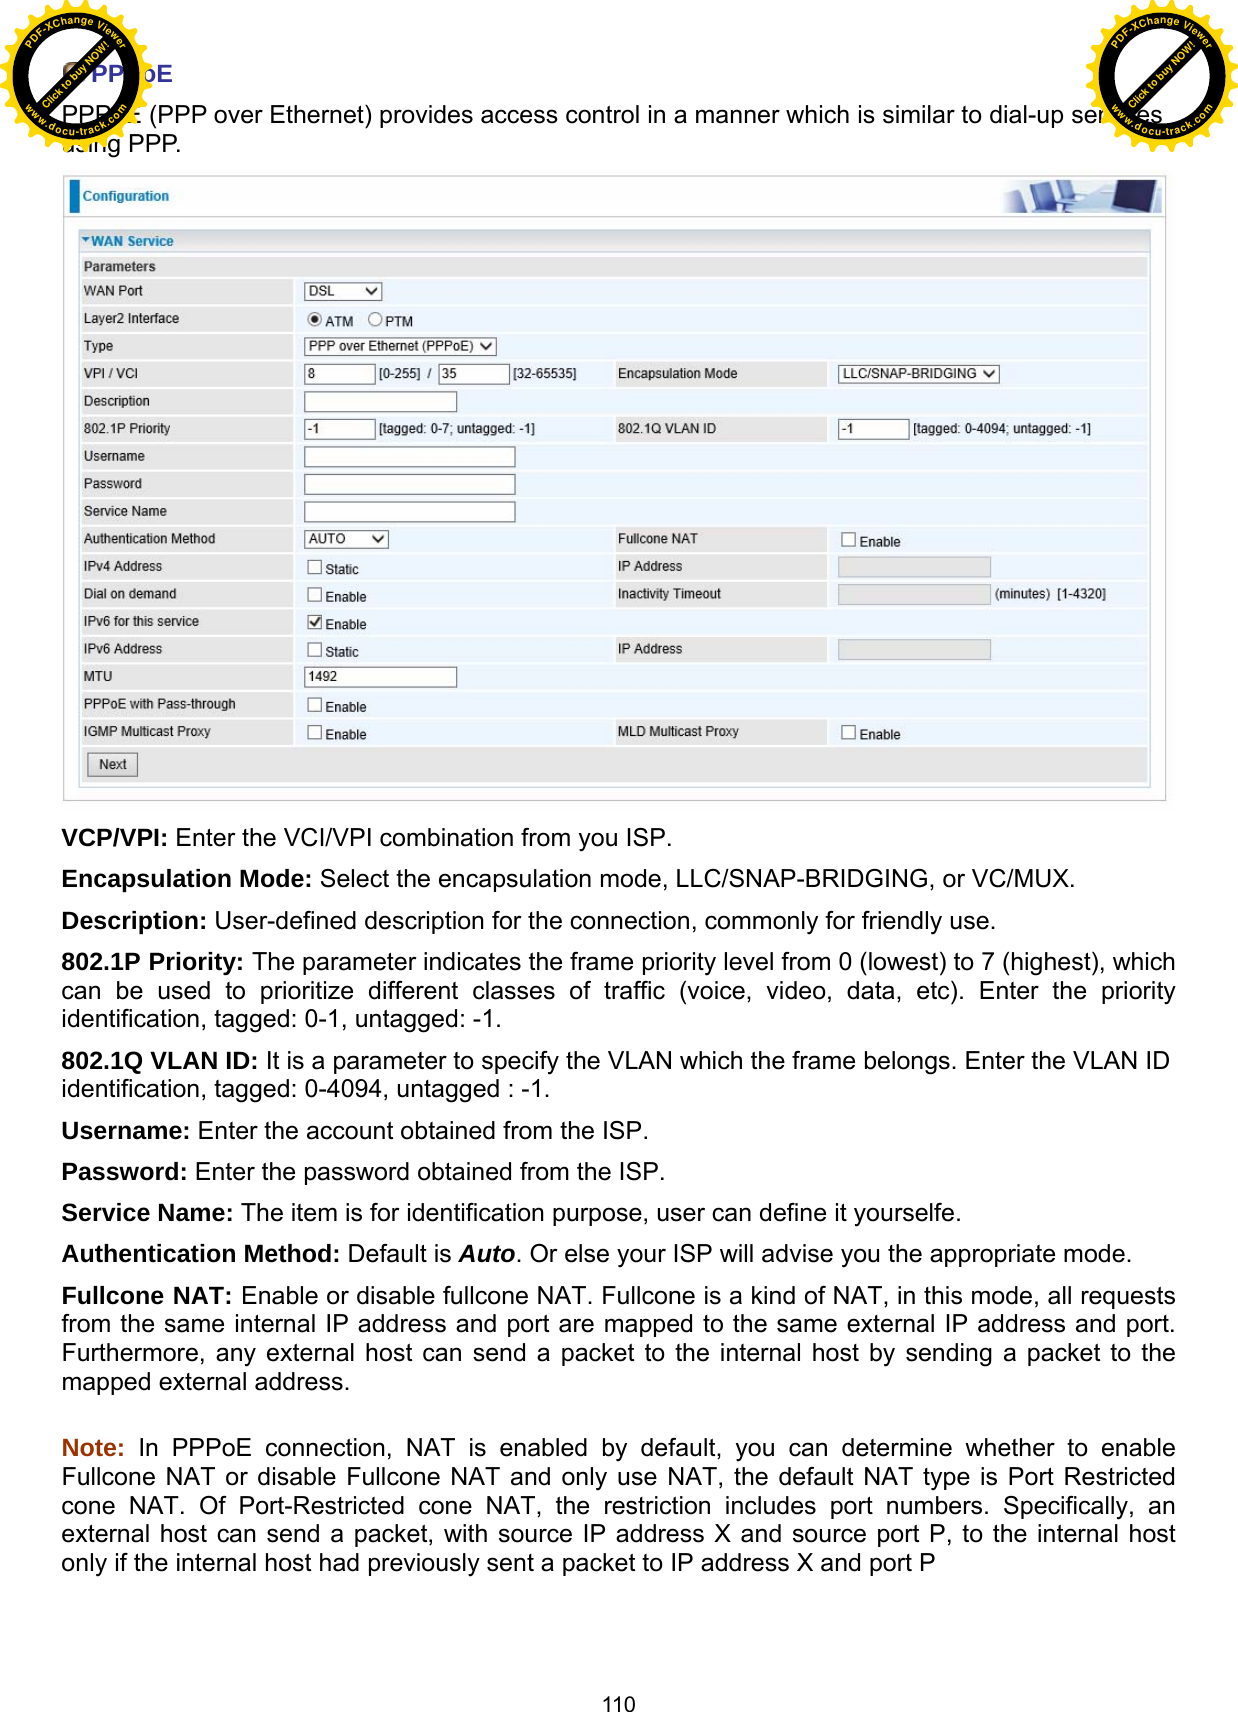  110  PPPoE PPPoE (PPP over Ethernet) provides access control in a manner which is similar to dial-up services using PPP.  VCP/VPI: Enter the VCI/VPI combination from you ISP.  Encapsulation Mode: Select the encapsulation mode, LLC/SNAP-BRIDGING, or VC/MUX. Description: User-defined description for the connection, commonly for friendly use. 802.1P Priority: The parameter indicates the frame priority level from 0 (lowest) to 7 (highest), which can be used to prioritize different classes of traffic (voice, video, data, etc). Enter the priority identification, tagged: 0-1, untagged: -1. 802.1Q VLAN ID: It is a parameter to specify the VLAN which the frame belongs. Enter the VLAN ID identification, tagged: 0-4094, untagged : -1. Username: Enter the account obtained from the ISP.  Password: Enter the password obtained from the ISP. Service Name: The item is for identification purpose, user can define it yourselfe. Authentication Method: Default is Auto. Or else your ISP will advise you the appropriate mode. Fullcone NAT: Enable or disable fullcone NAT. Fullcone is a kind of NAT, in this mode, all requests from the same internal IP address and port are mapped to the same external IP address and port. Furthermore, any external host can send a packet to the internal host by sending a packet to the mapped external address.  Note: In PPPoE connection, NAT is enabled by default, you can determine whether to enable Fullcone NAT or disable Fullcone NAT and only use NAT, the default NAT type is Port Restricted cone NAT. Of Port-Restricted cone NAT, the restriction includes port numbers. Specifically, an external host can send a packet, with source IP address X and source port P, to the internal host only if the internal host had previously sent a packet to IP address X and port P   Click to buy NOW!PDF-XChange Viewerwww.docu-track.comClick to buy NOW!PDF-XChange Viewerwww.docu-track.com